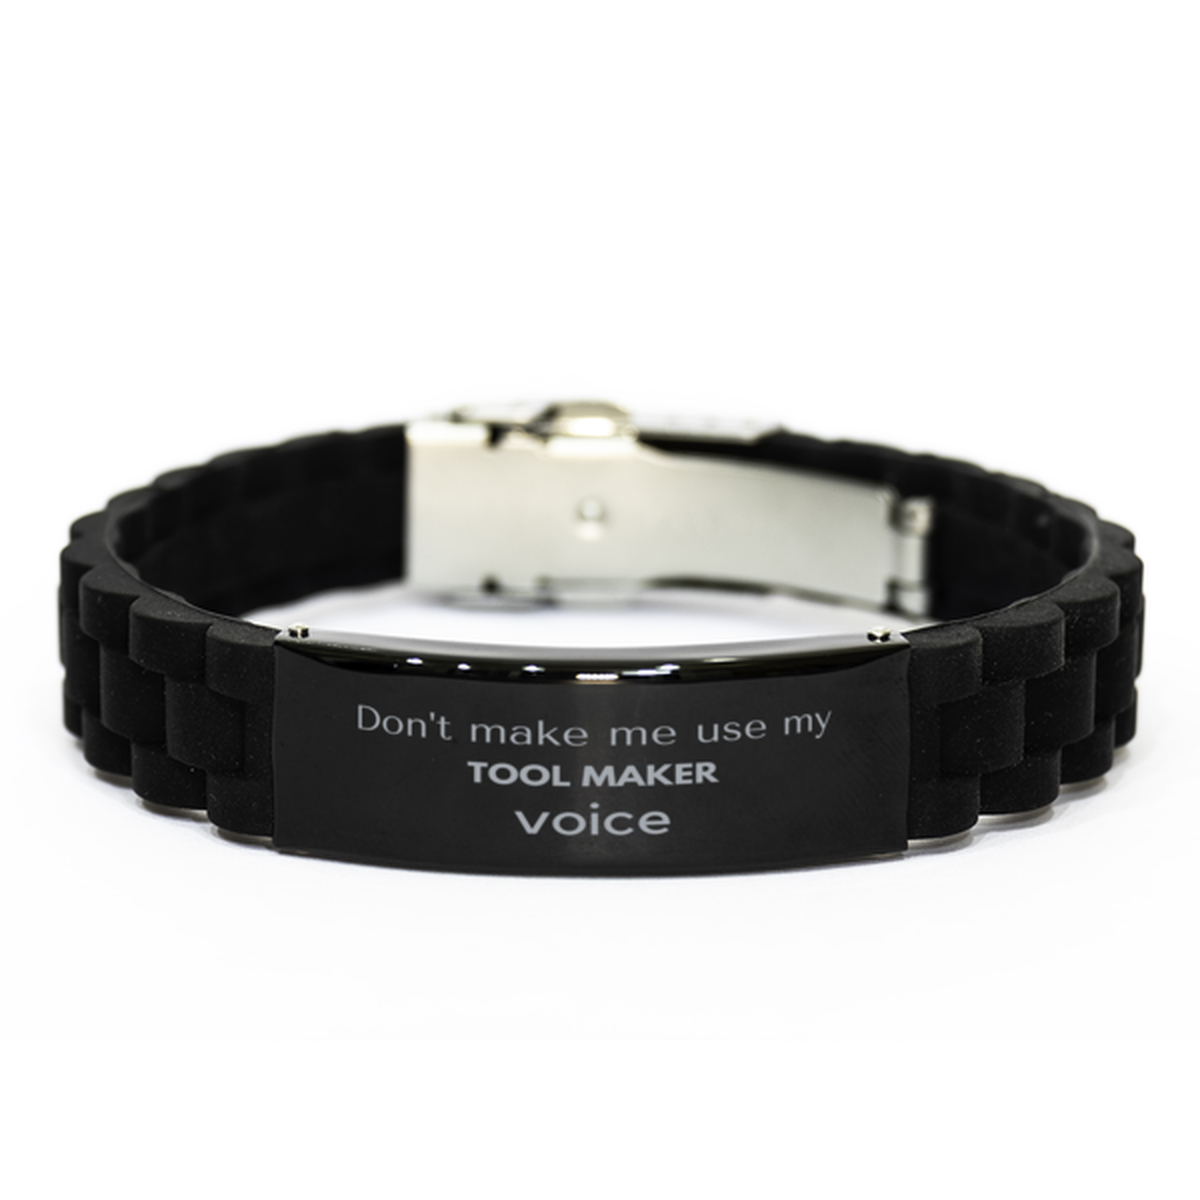 Don't make me use my Tool Maker voice, Sarcasm Tool Maker Gifts, Christmas Tool Maker Black Glidelock Clasp Bracelet Birthday Unique Gifts For Tool Maker Coworkers, Men, Women, Colleague, Friends